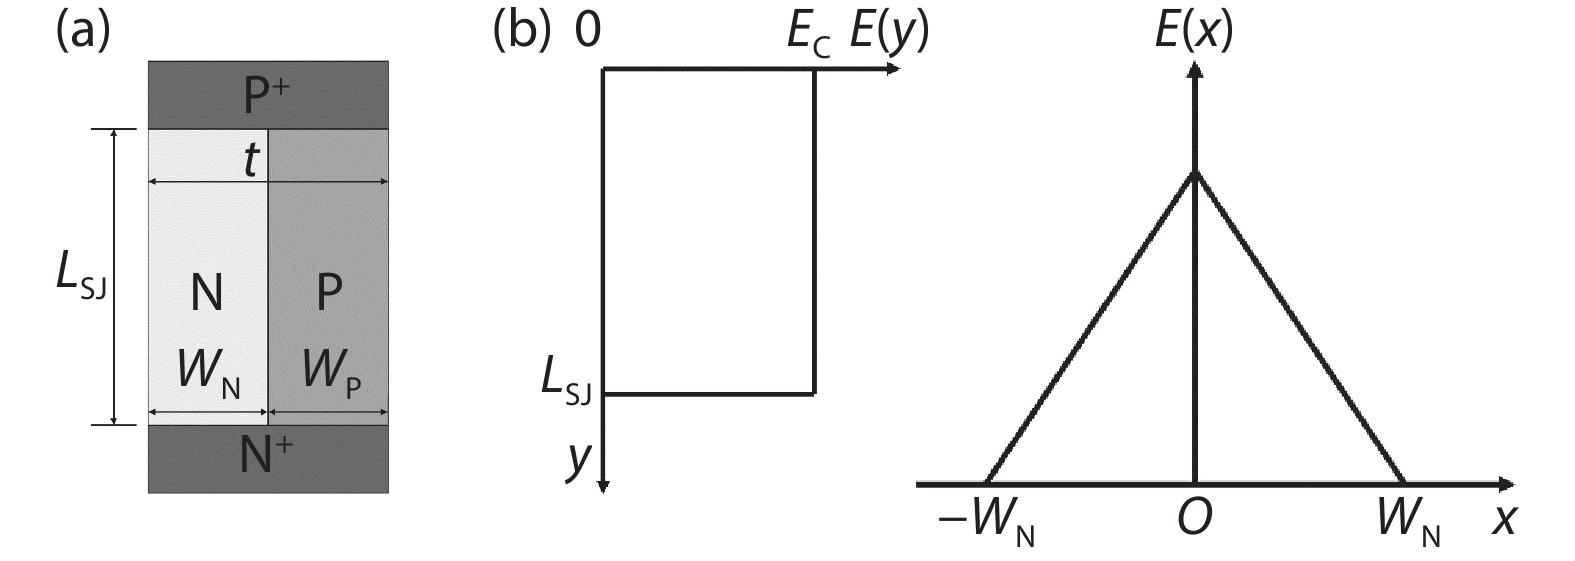 (a) SJ structure. (b) Electric field distribution in y- and x-directions.